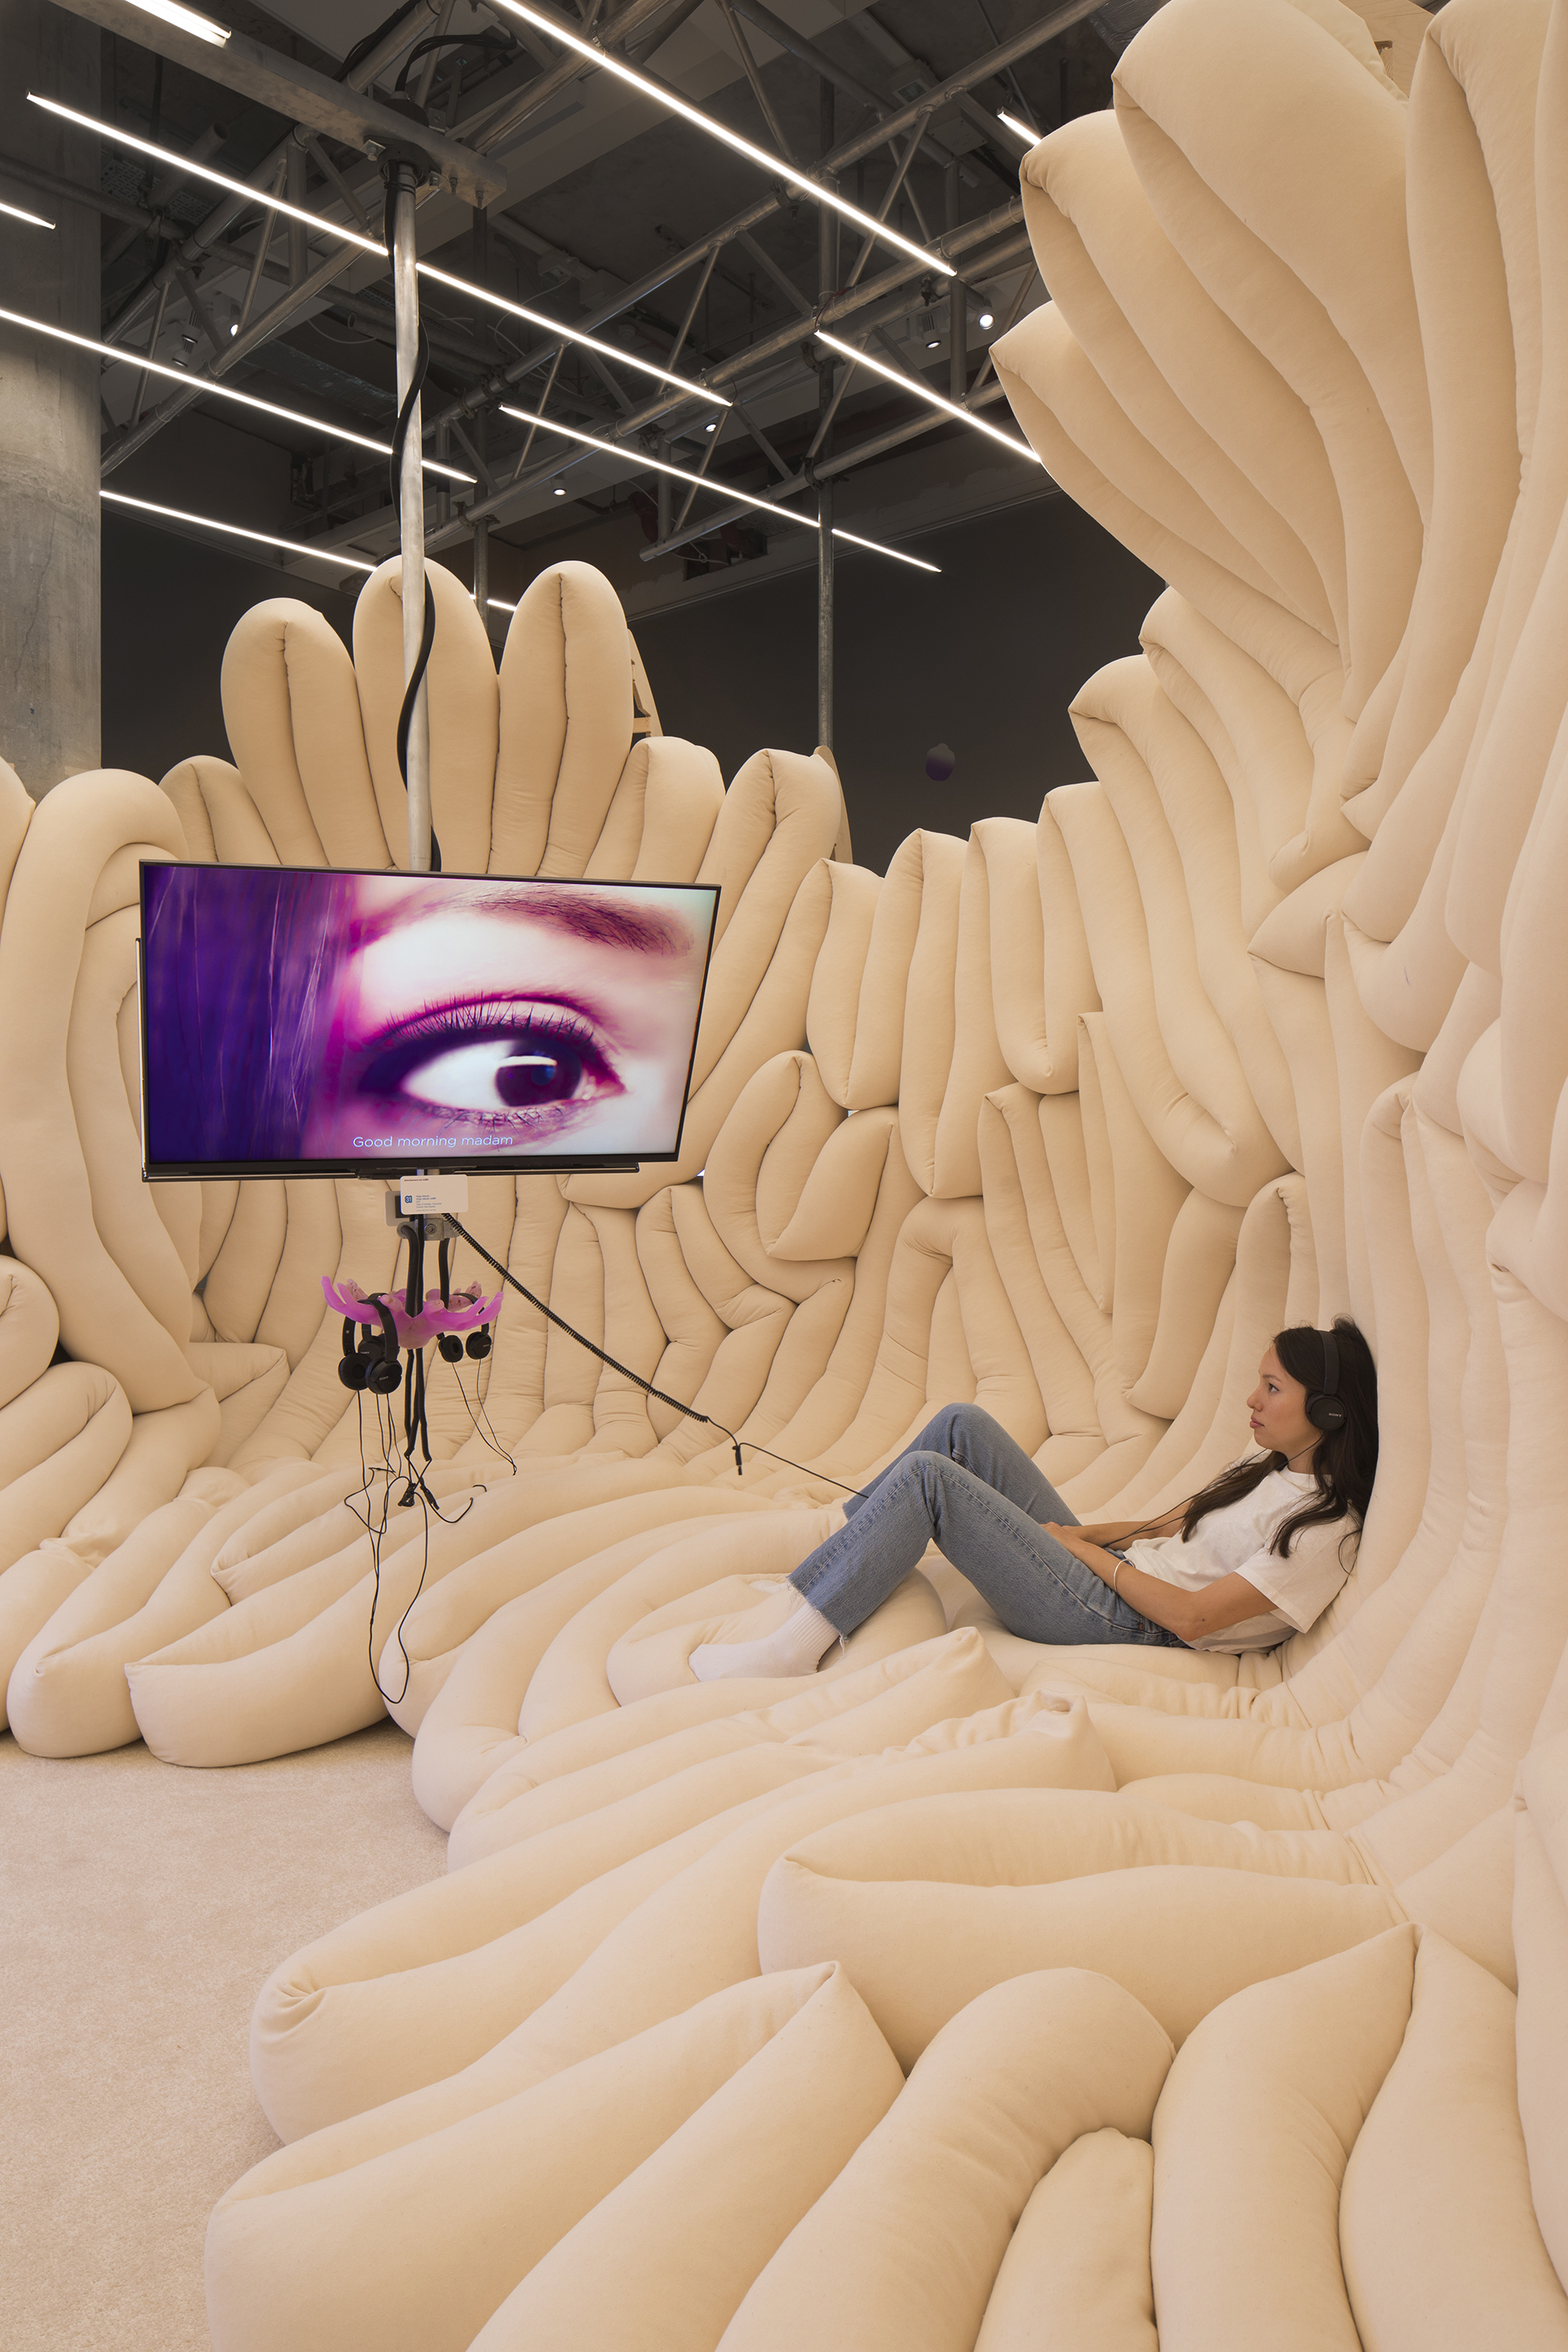 London?s Design Museum offers a new exhibition about ASMR: the world of  oddly pleasant sensations